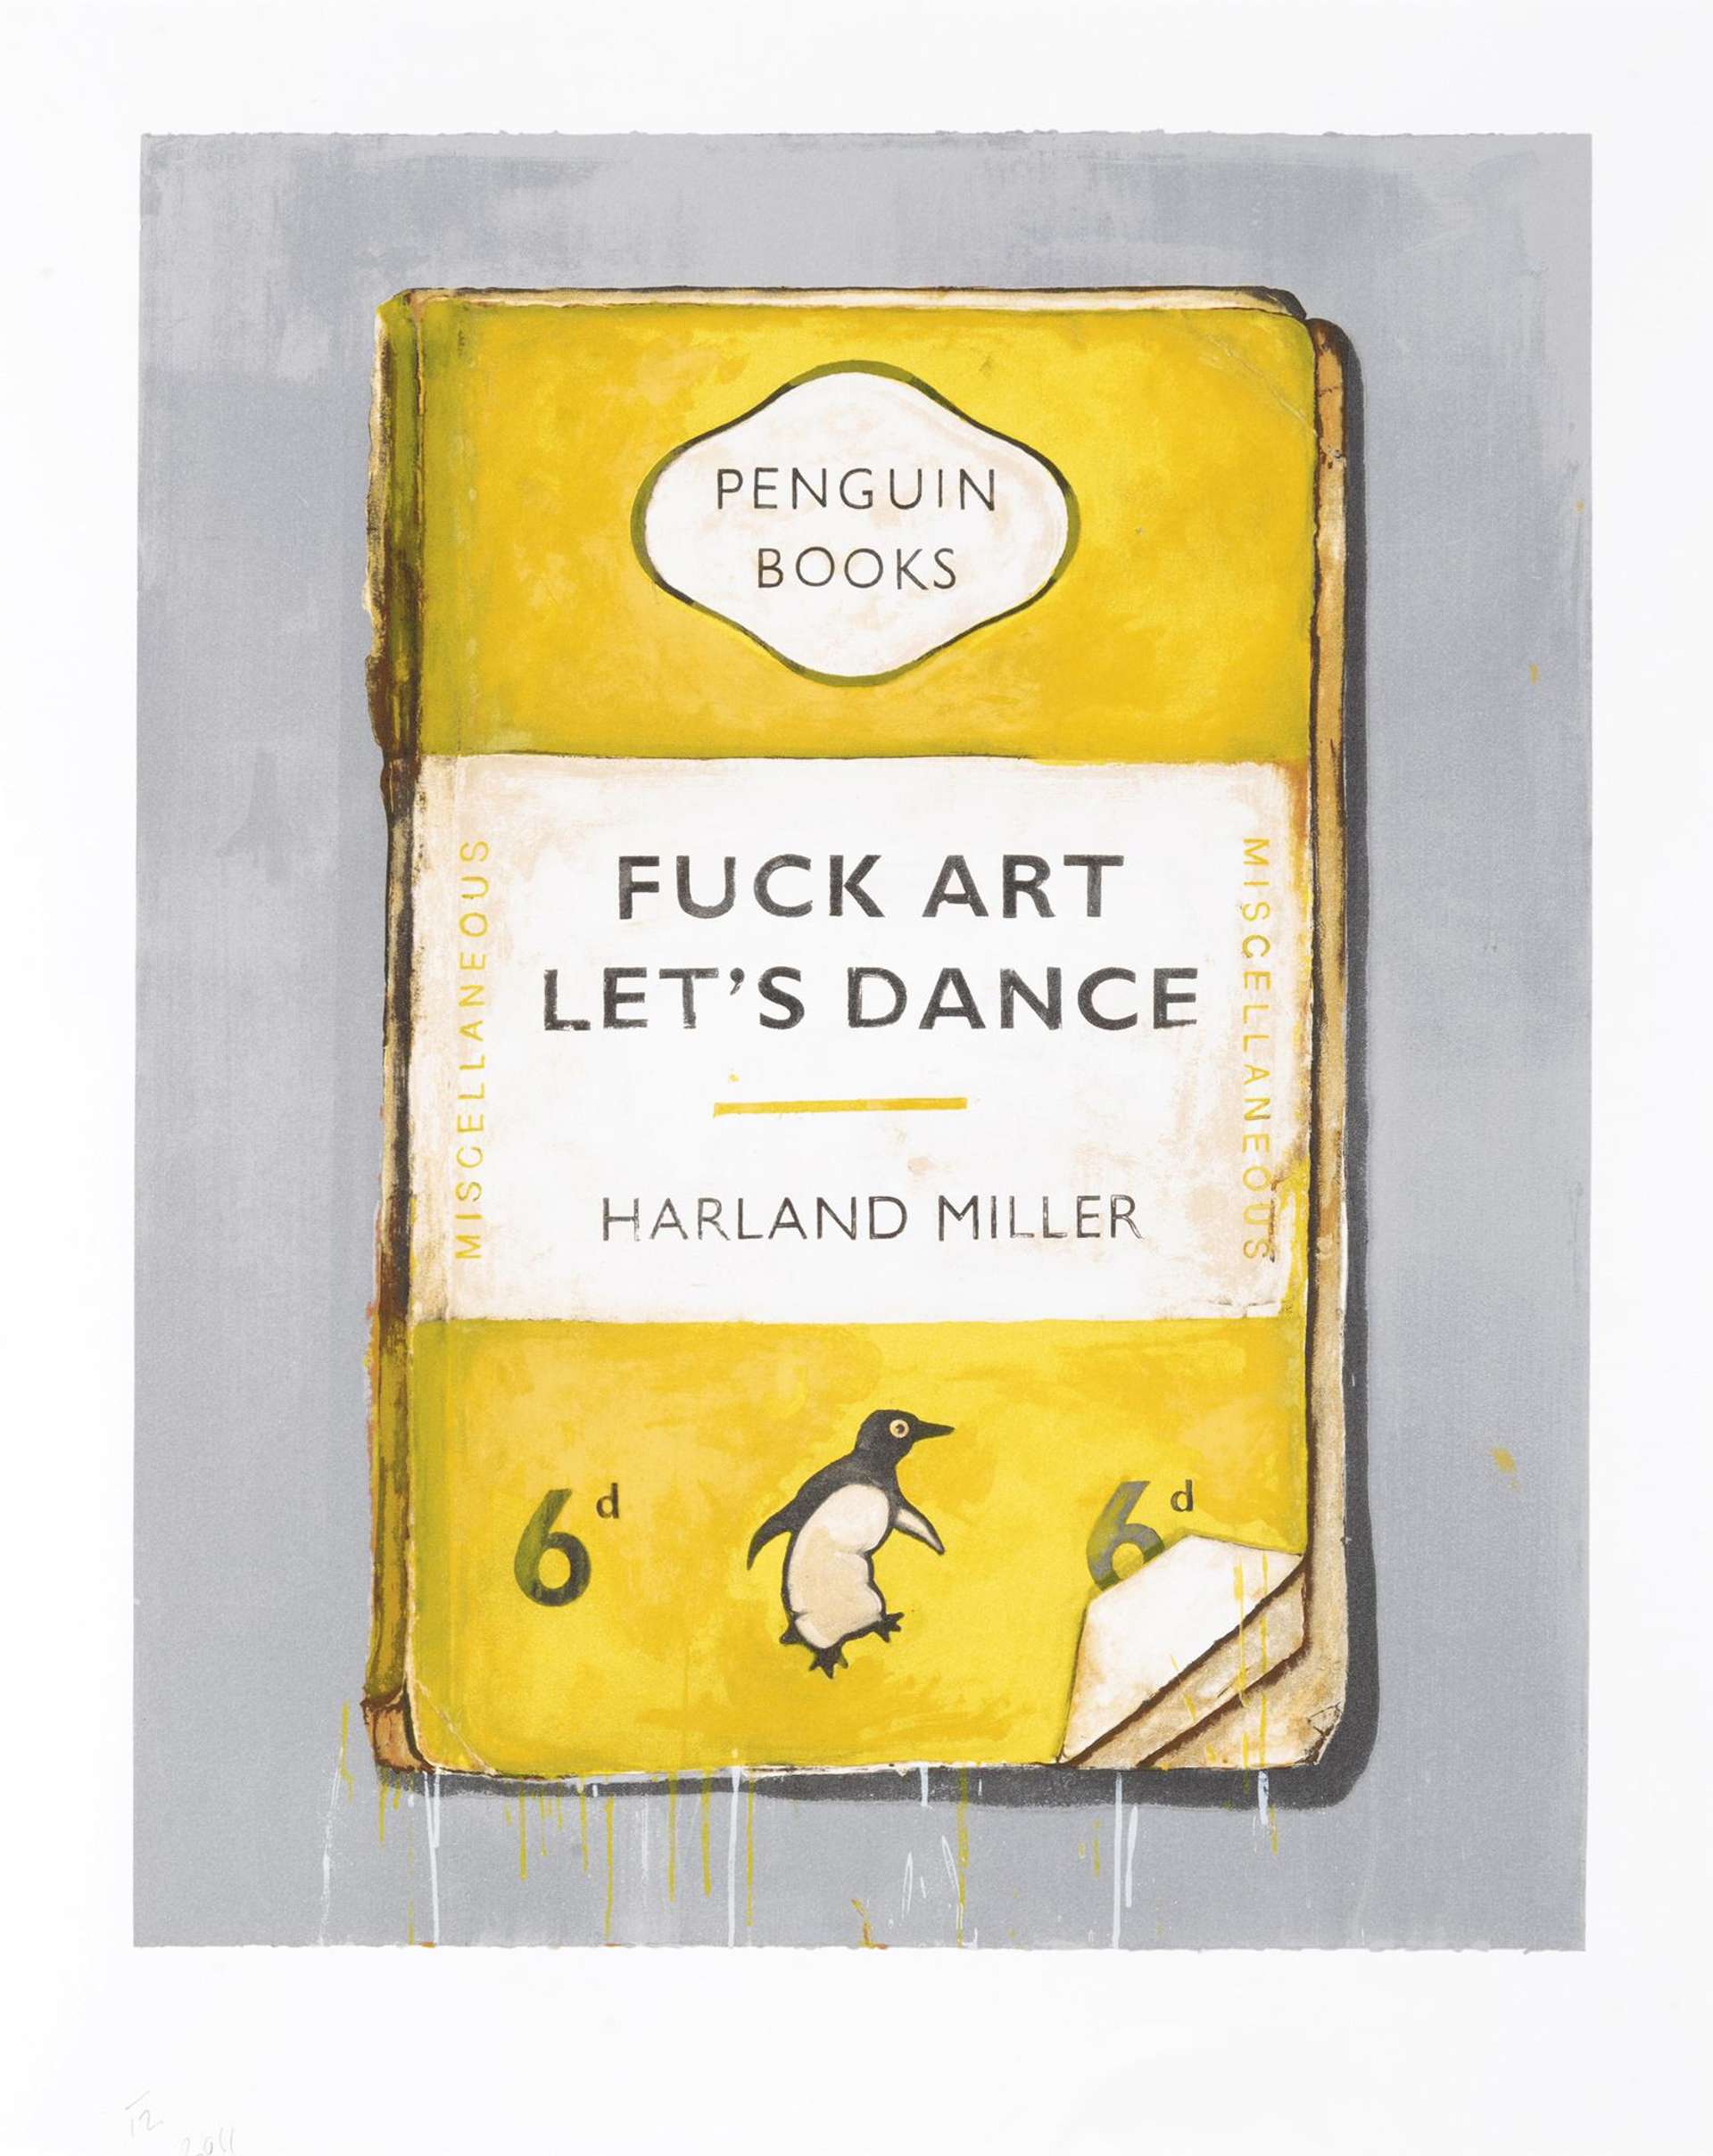 The Ultimate Guide to Harland Miller: A - Z Facts